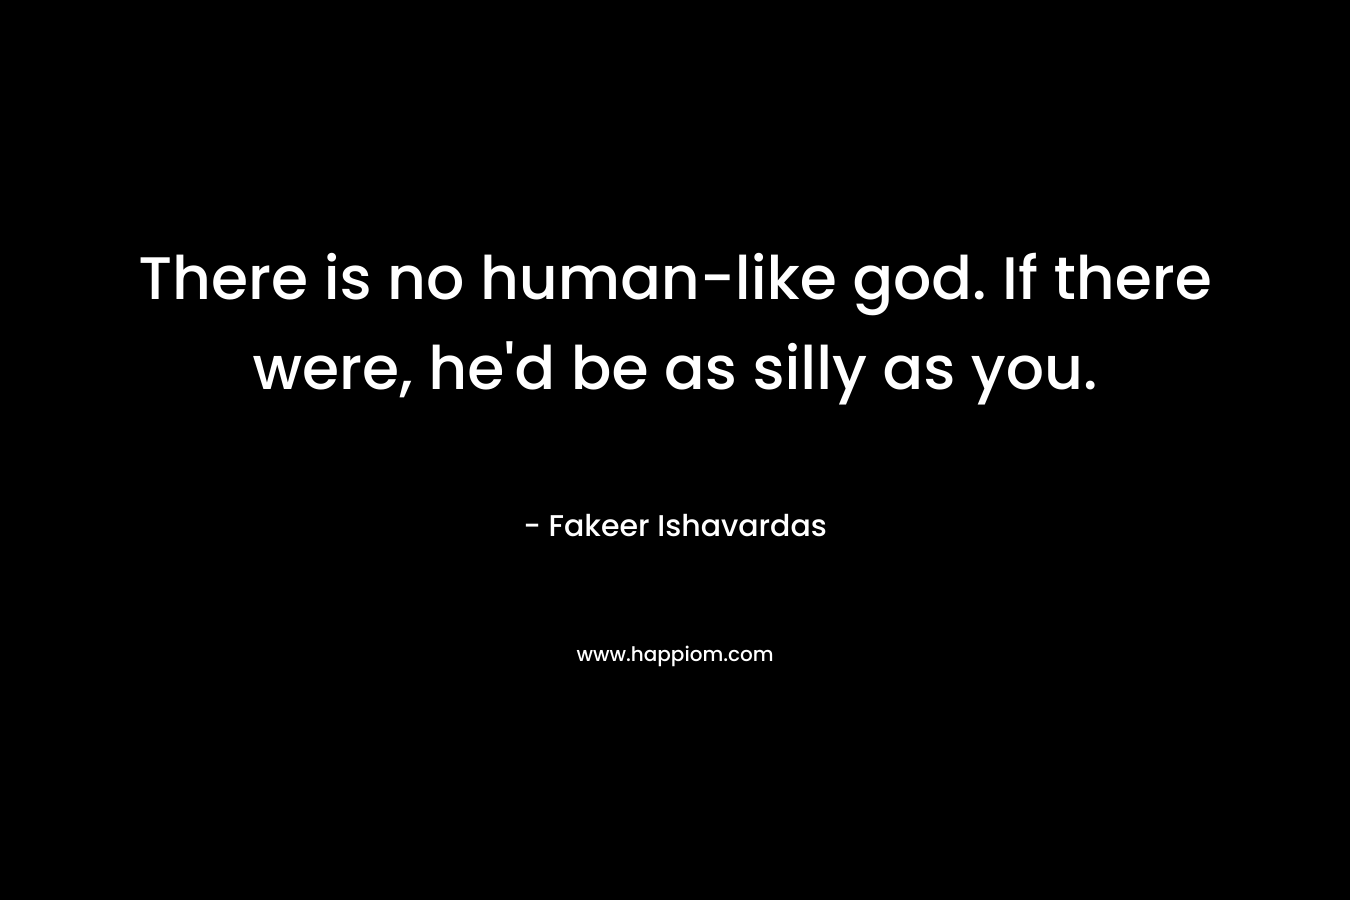 There is no human-like god. If there were, he'd be as silly as you.